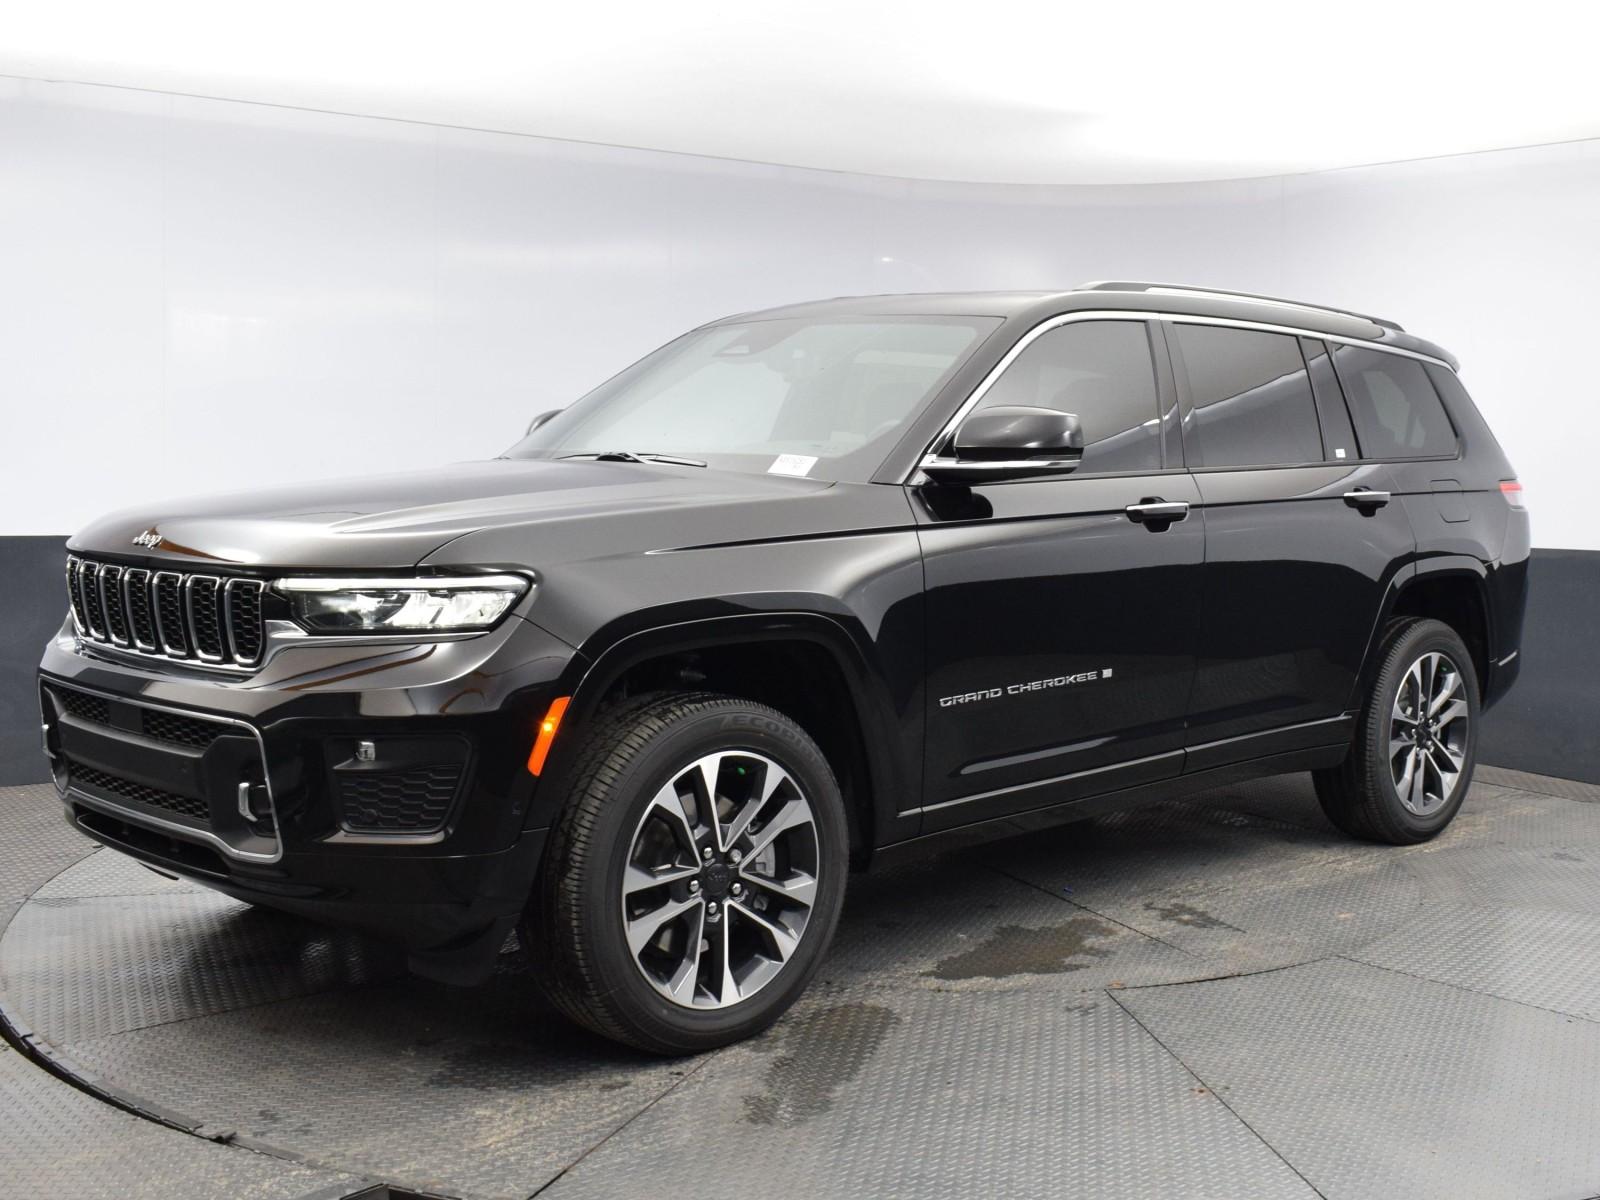 New 2022 Jeep Grand Cherokee L Overland 4×2 Sport Utility in Tulsa  #N8539253 | South Pointe Chrysler Dodge Jeep Ram